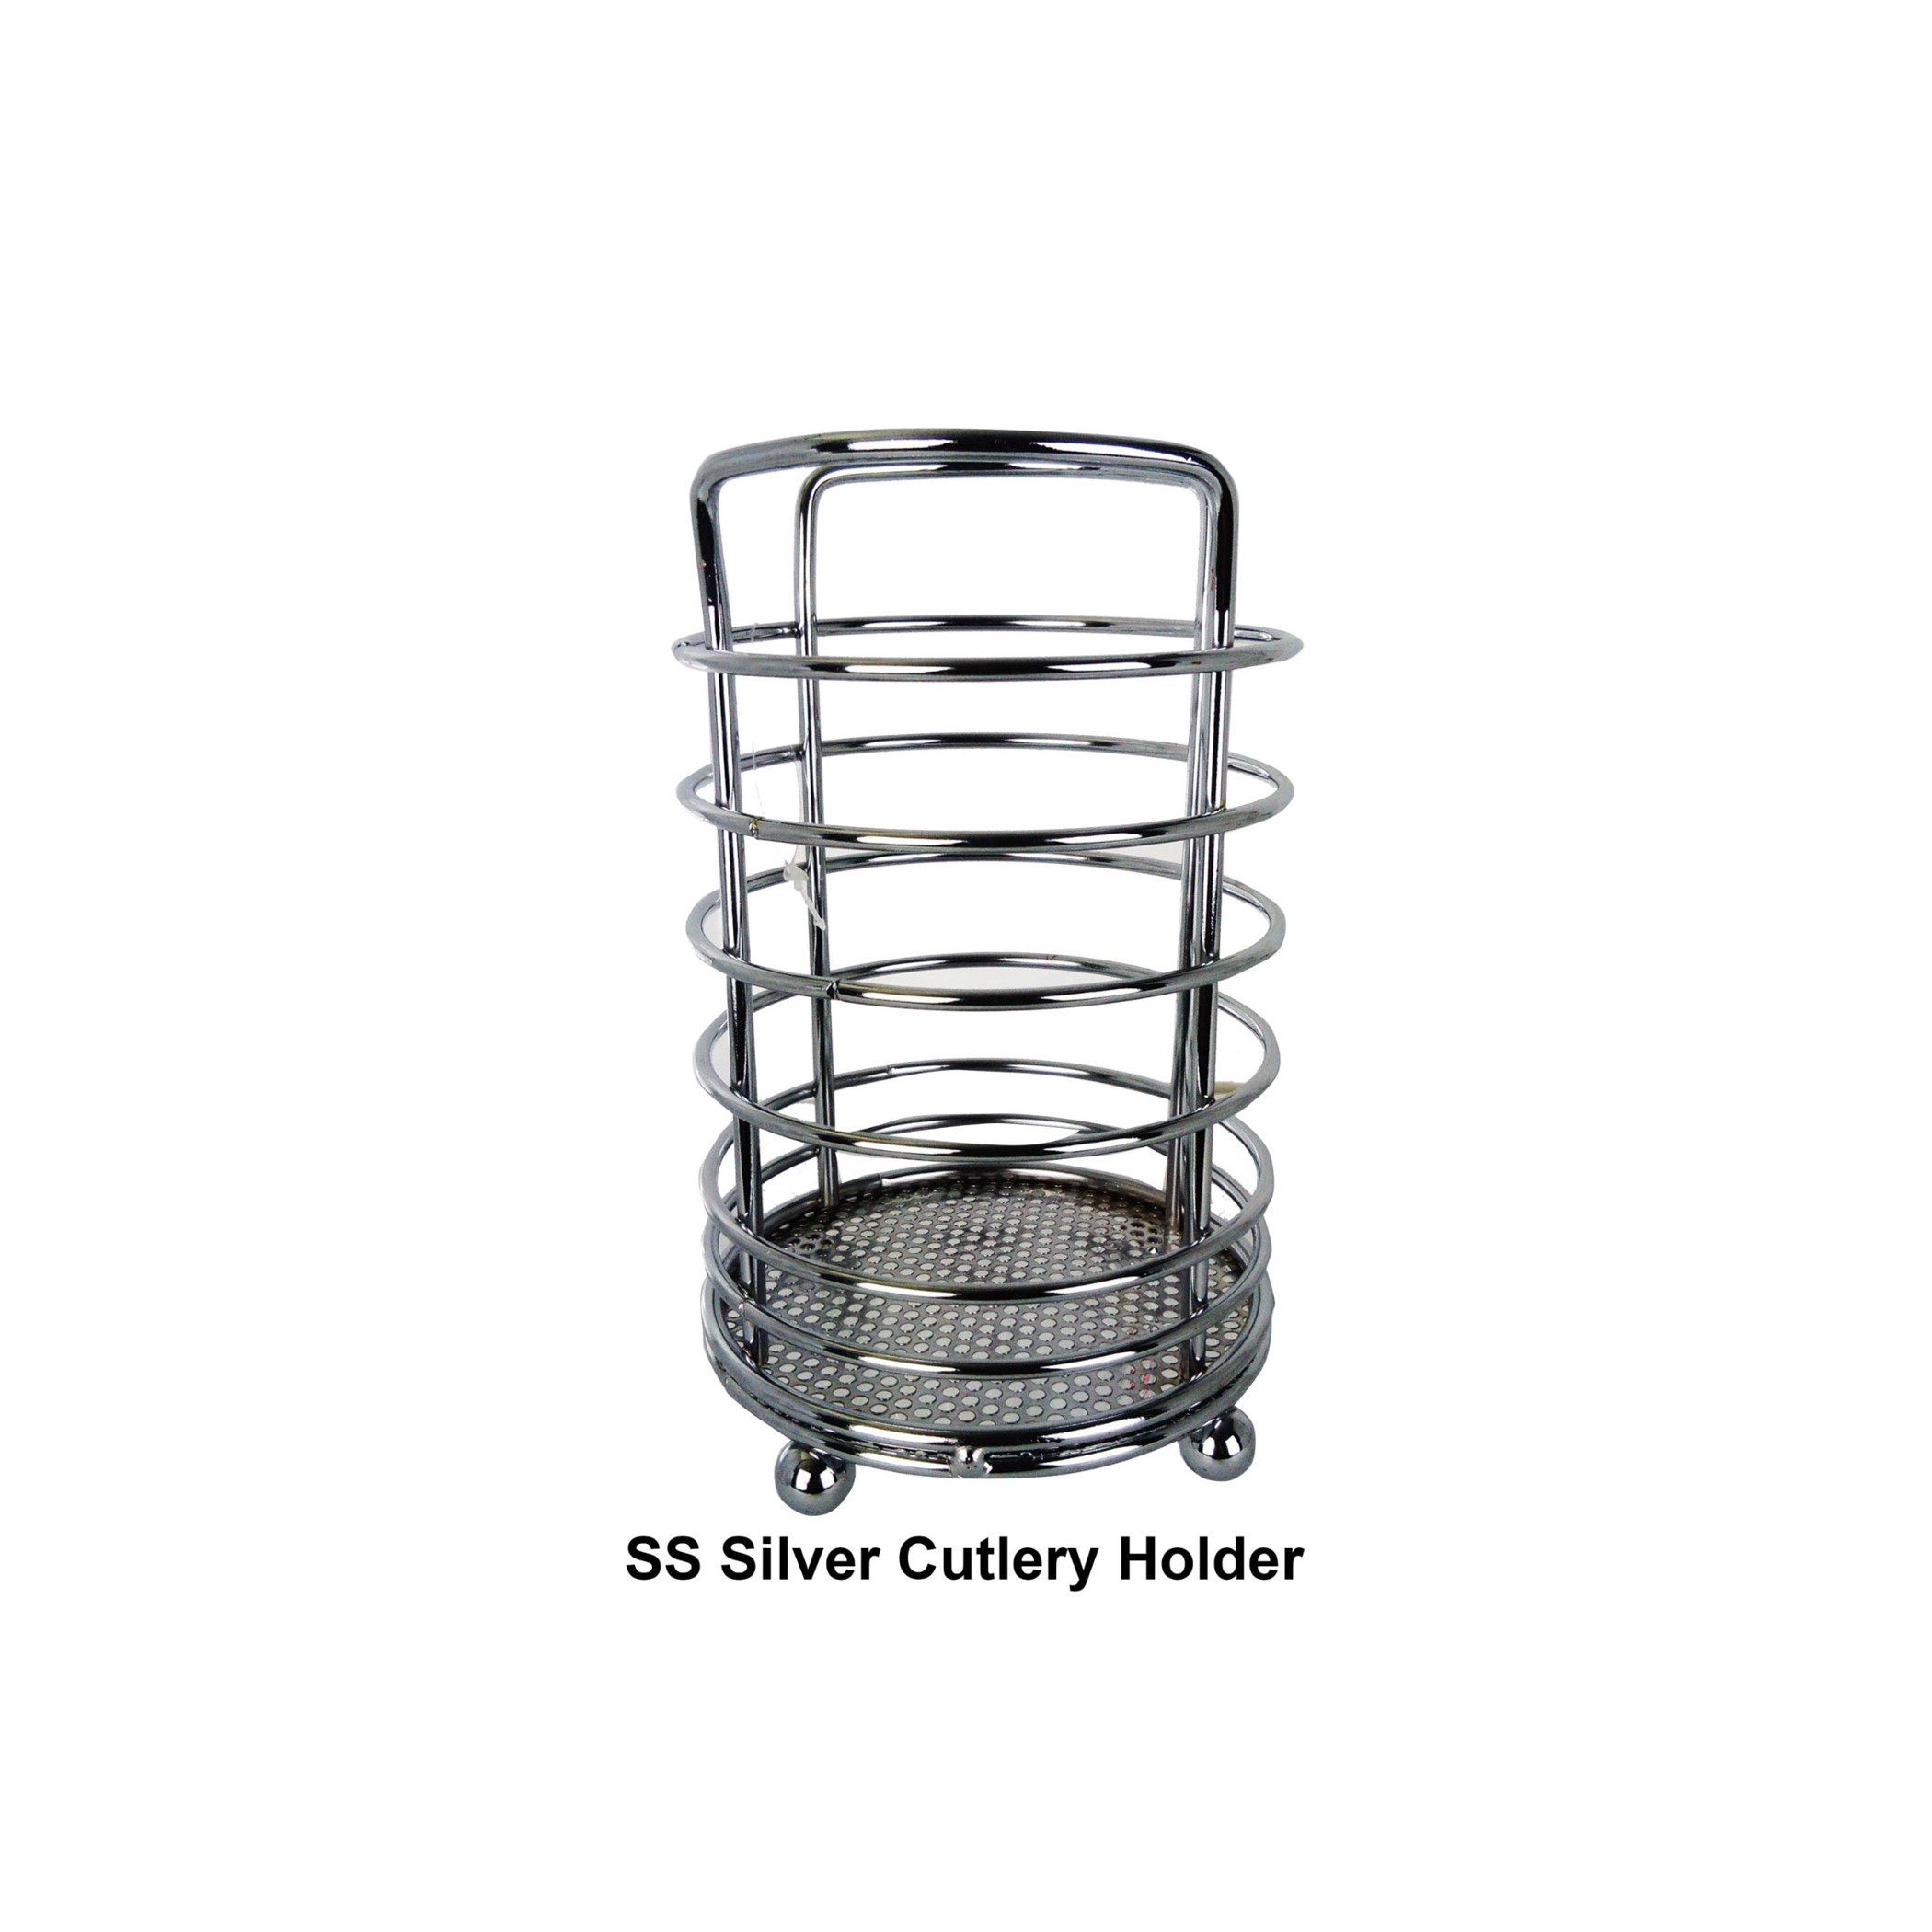 Stainless Steel Silver Cutlery Holder